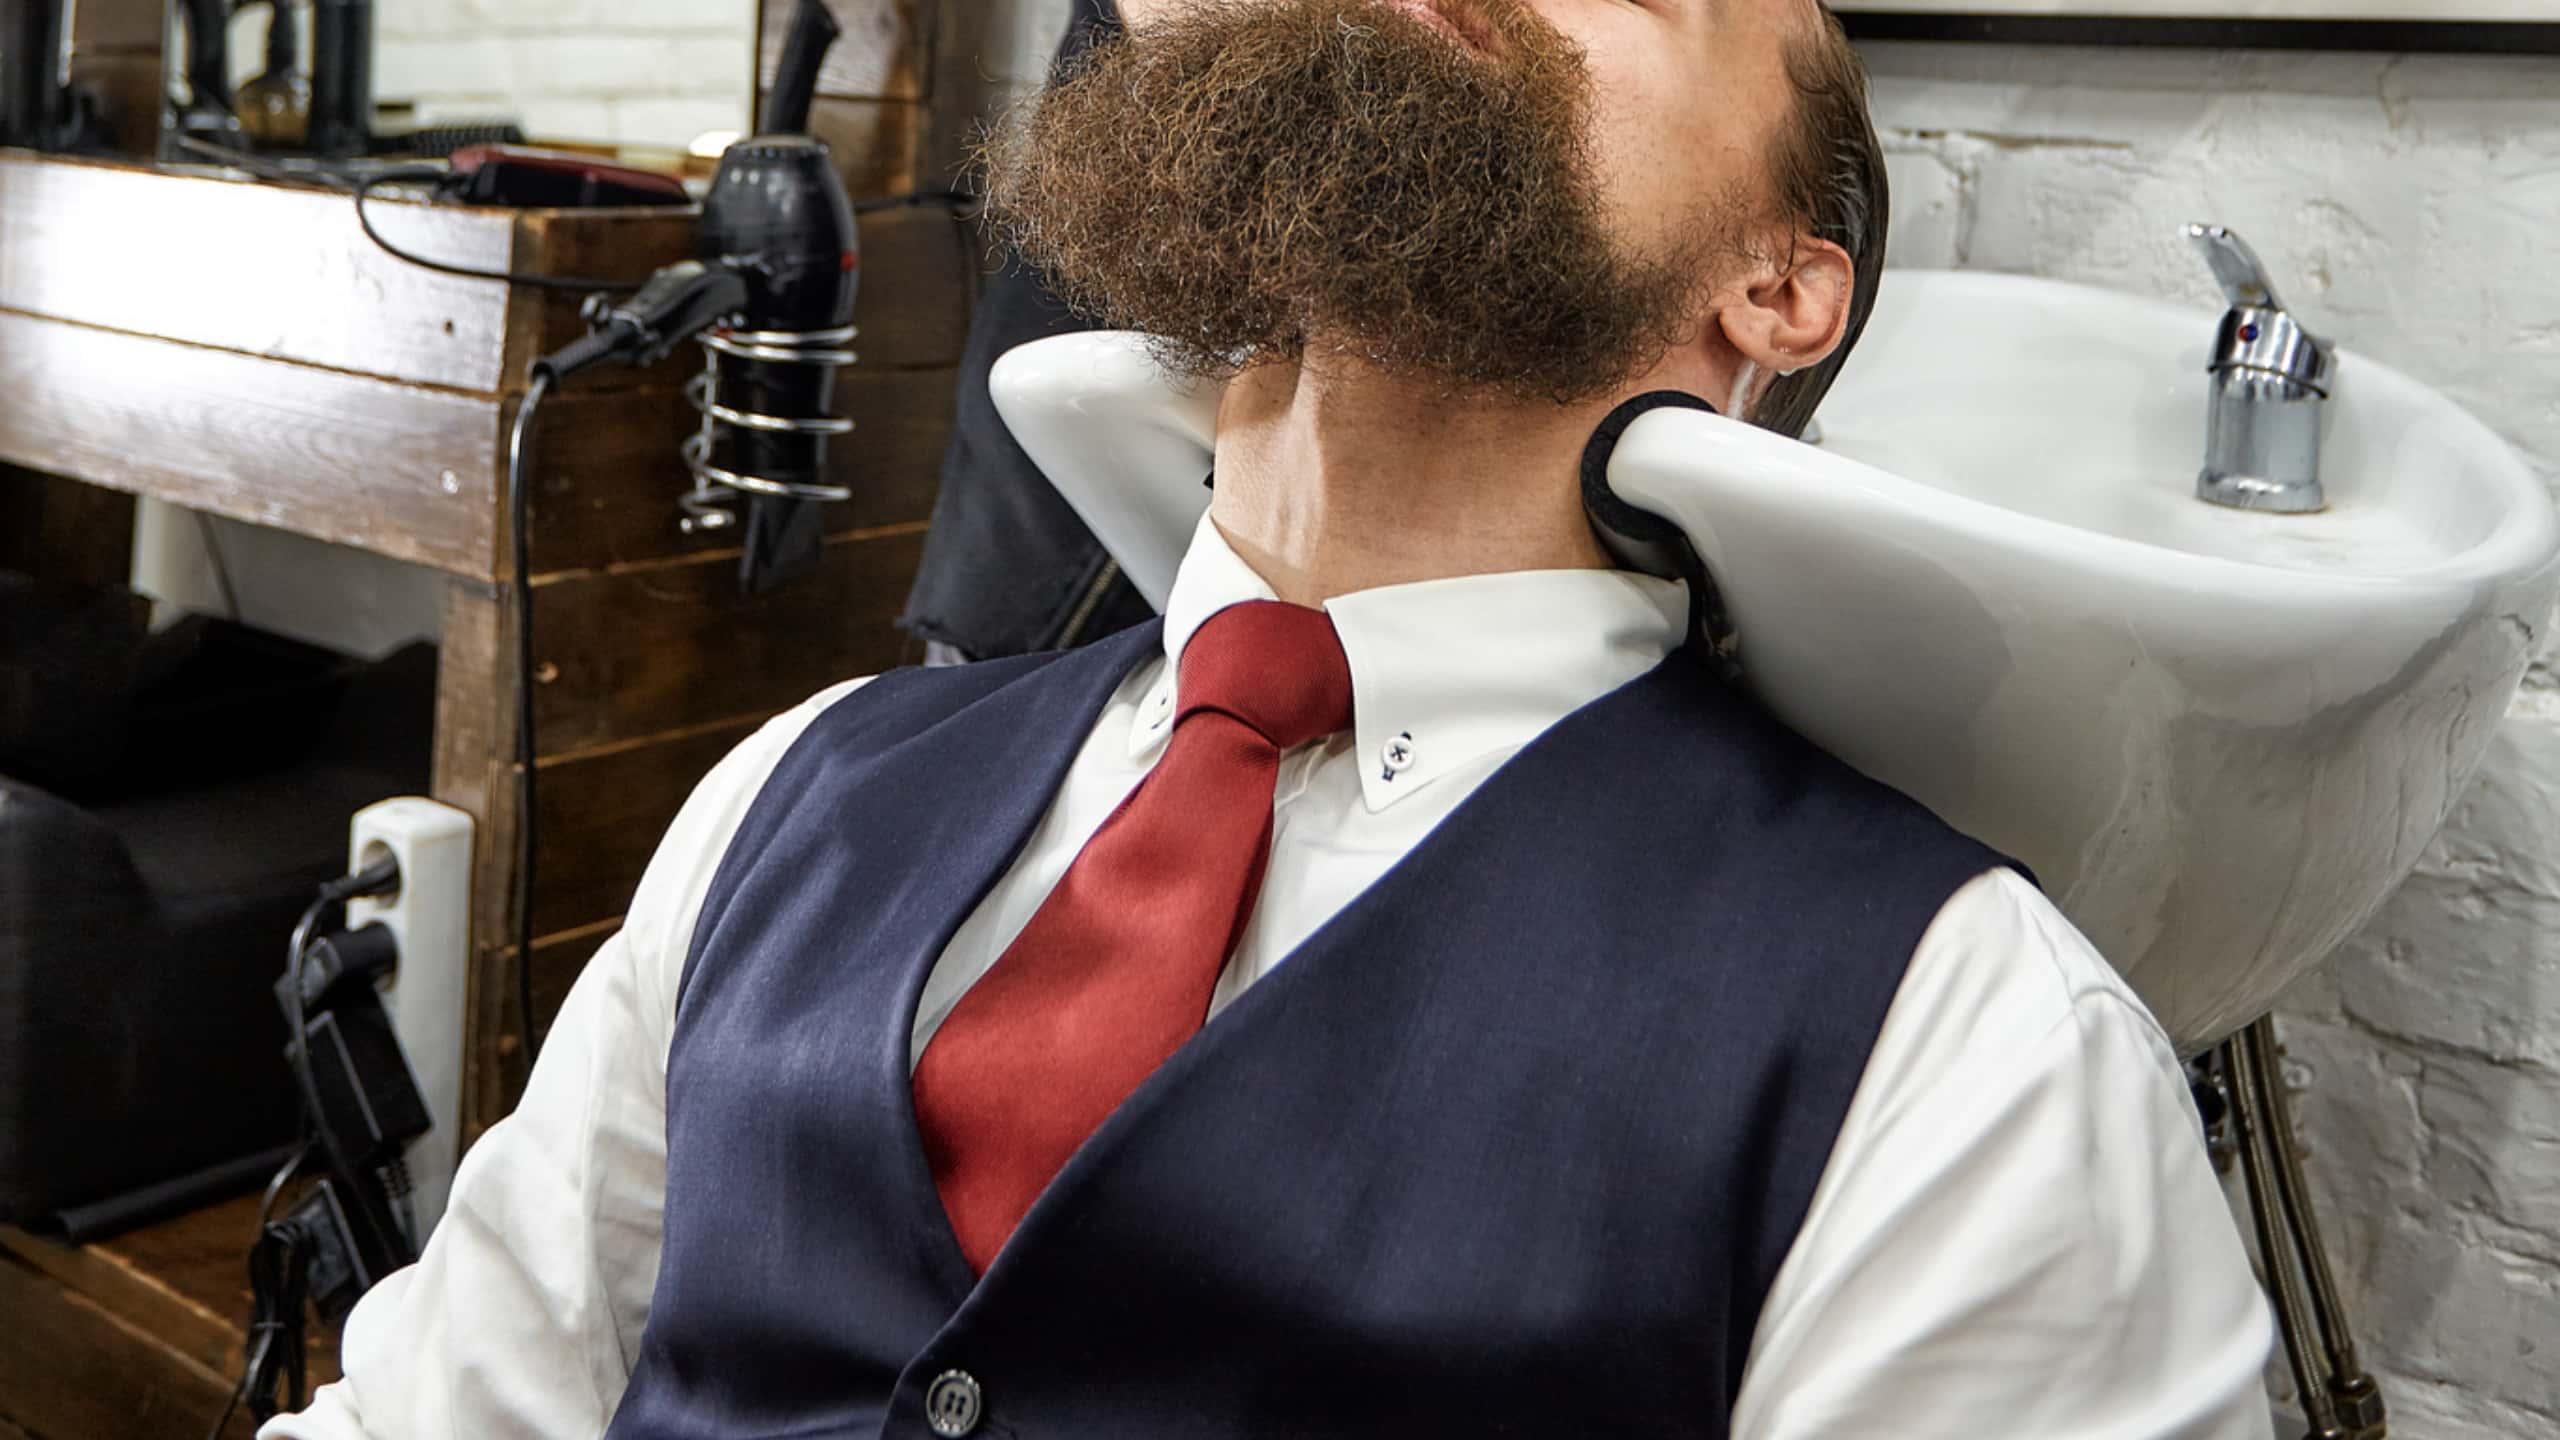 What Are The Benefits of Using High-Quality Products on Your Beard?  